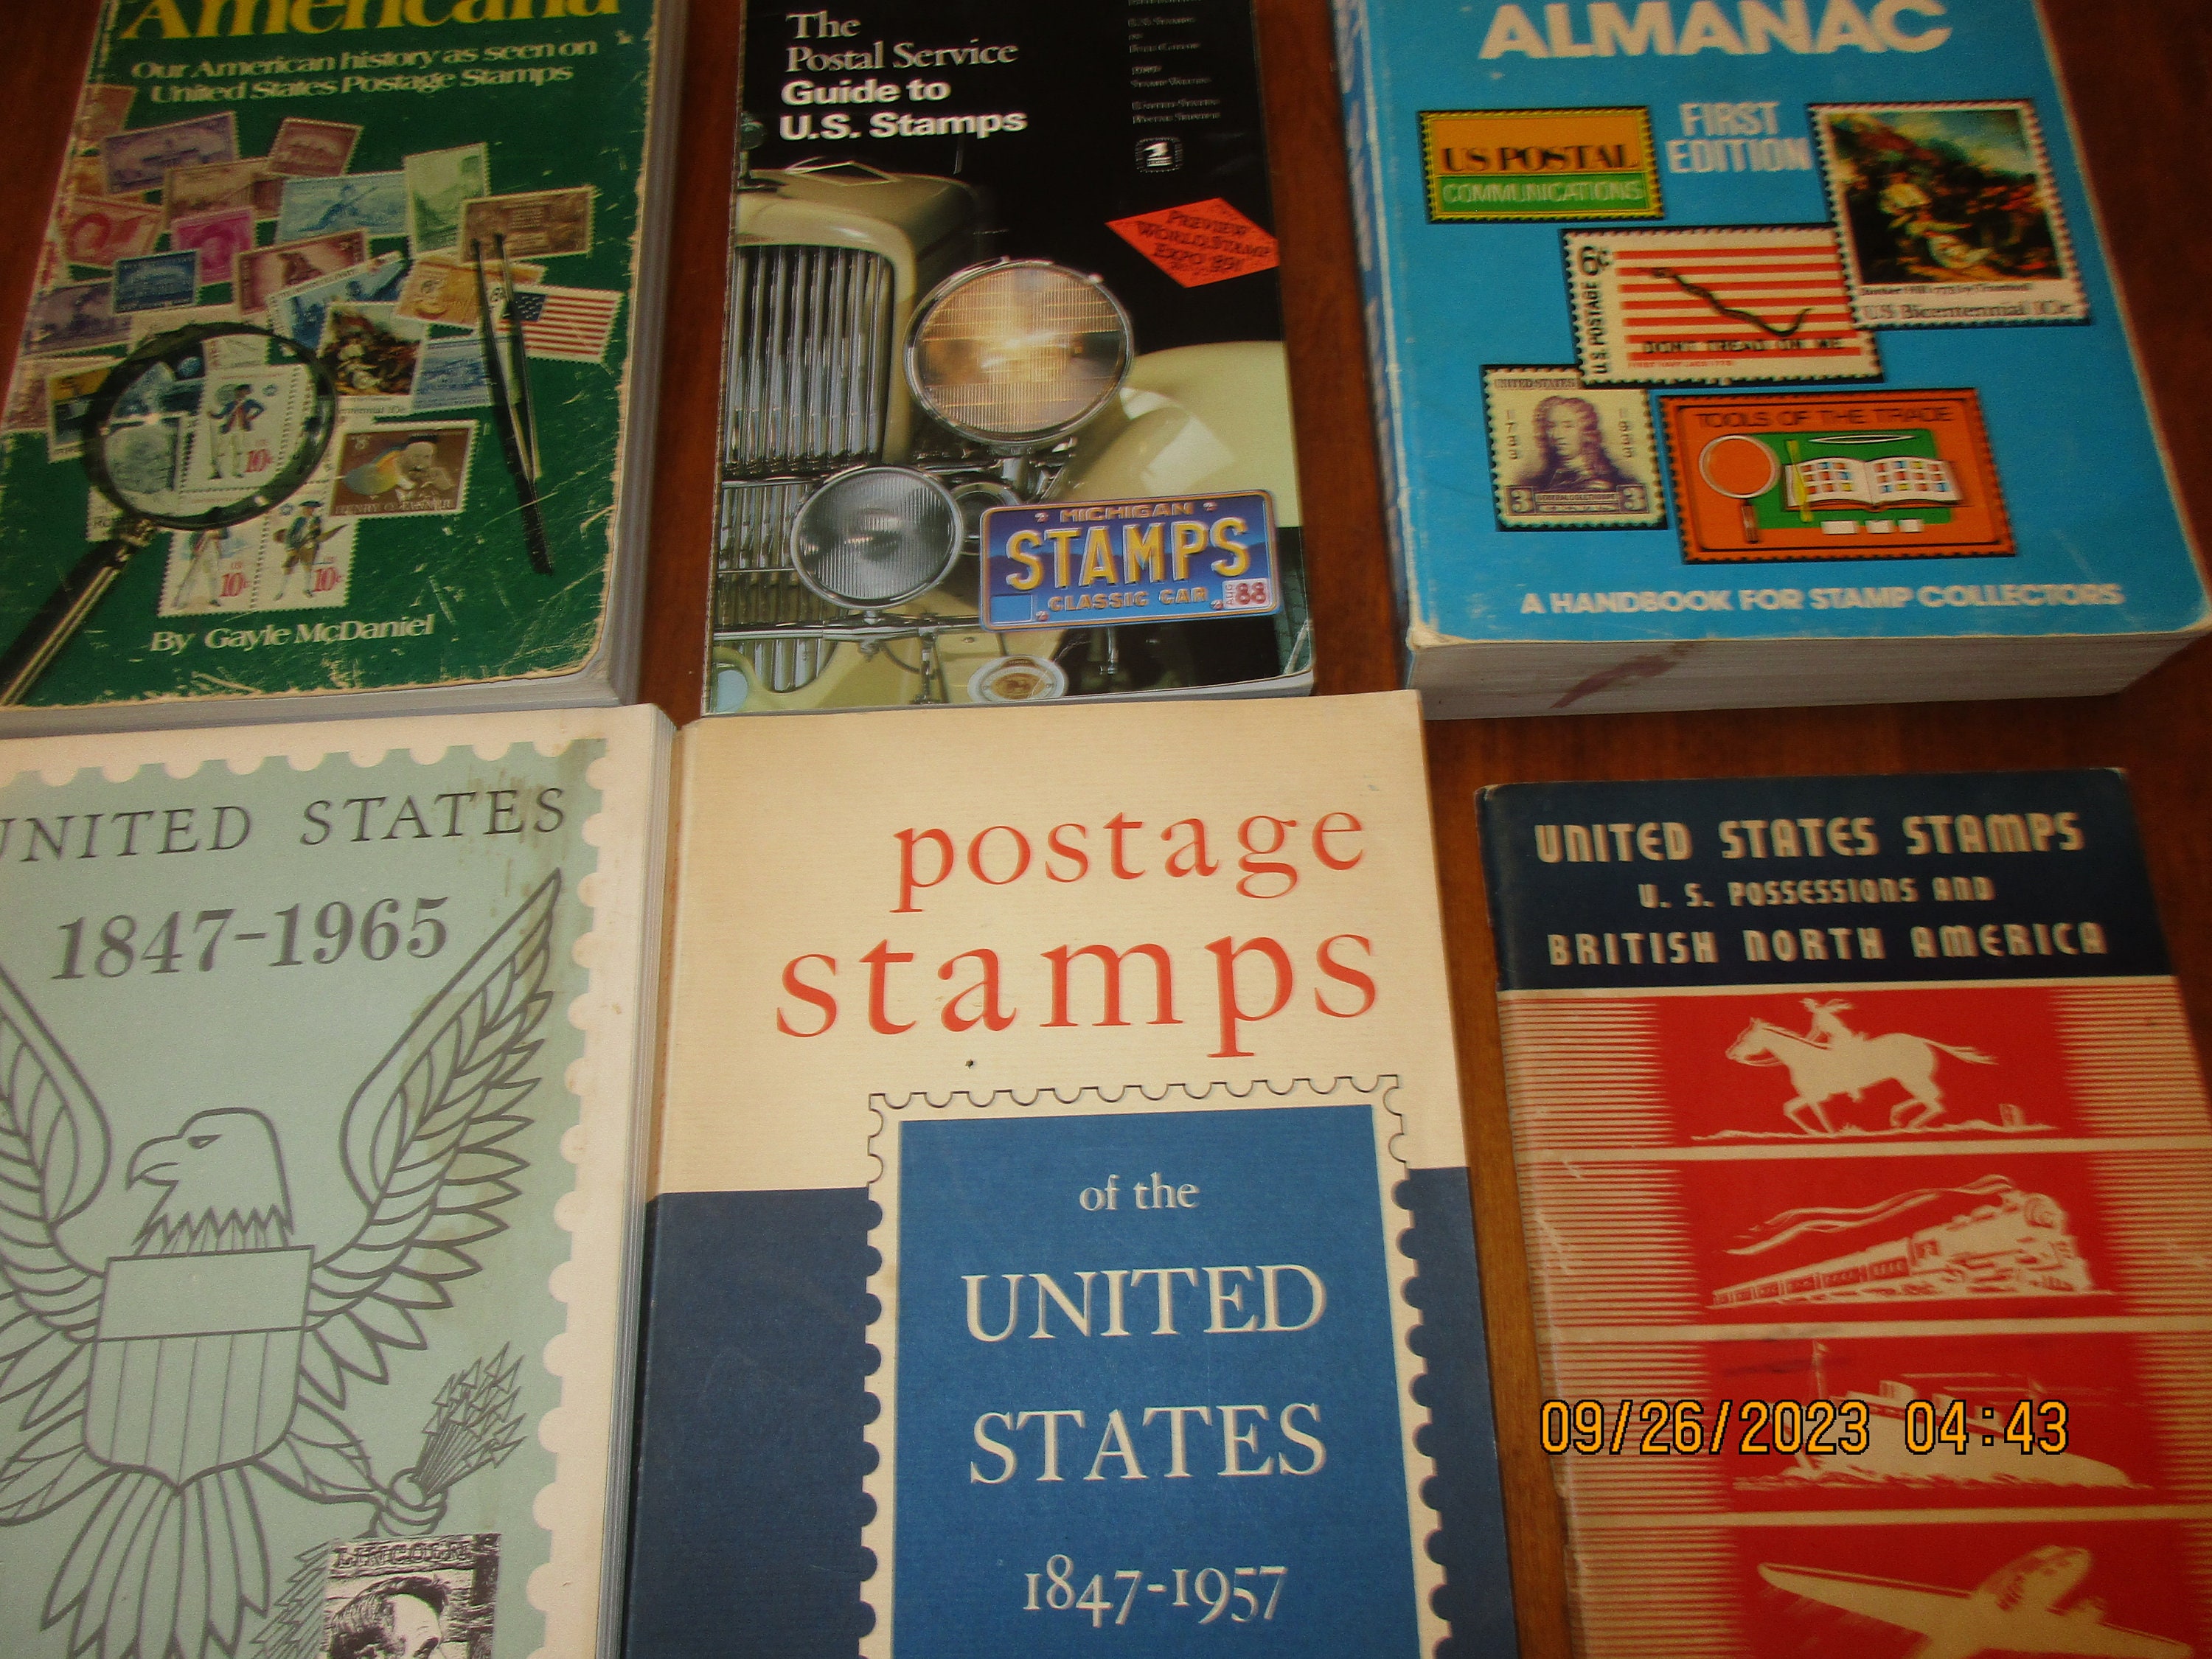 Stamp Album With 500 PCS, 200 Pcs, 100 Different World Wide